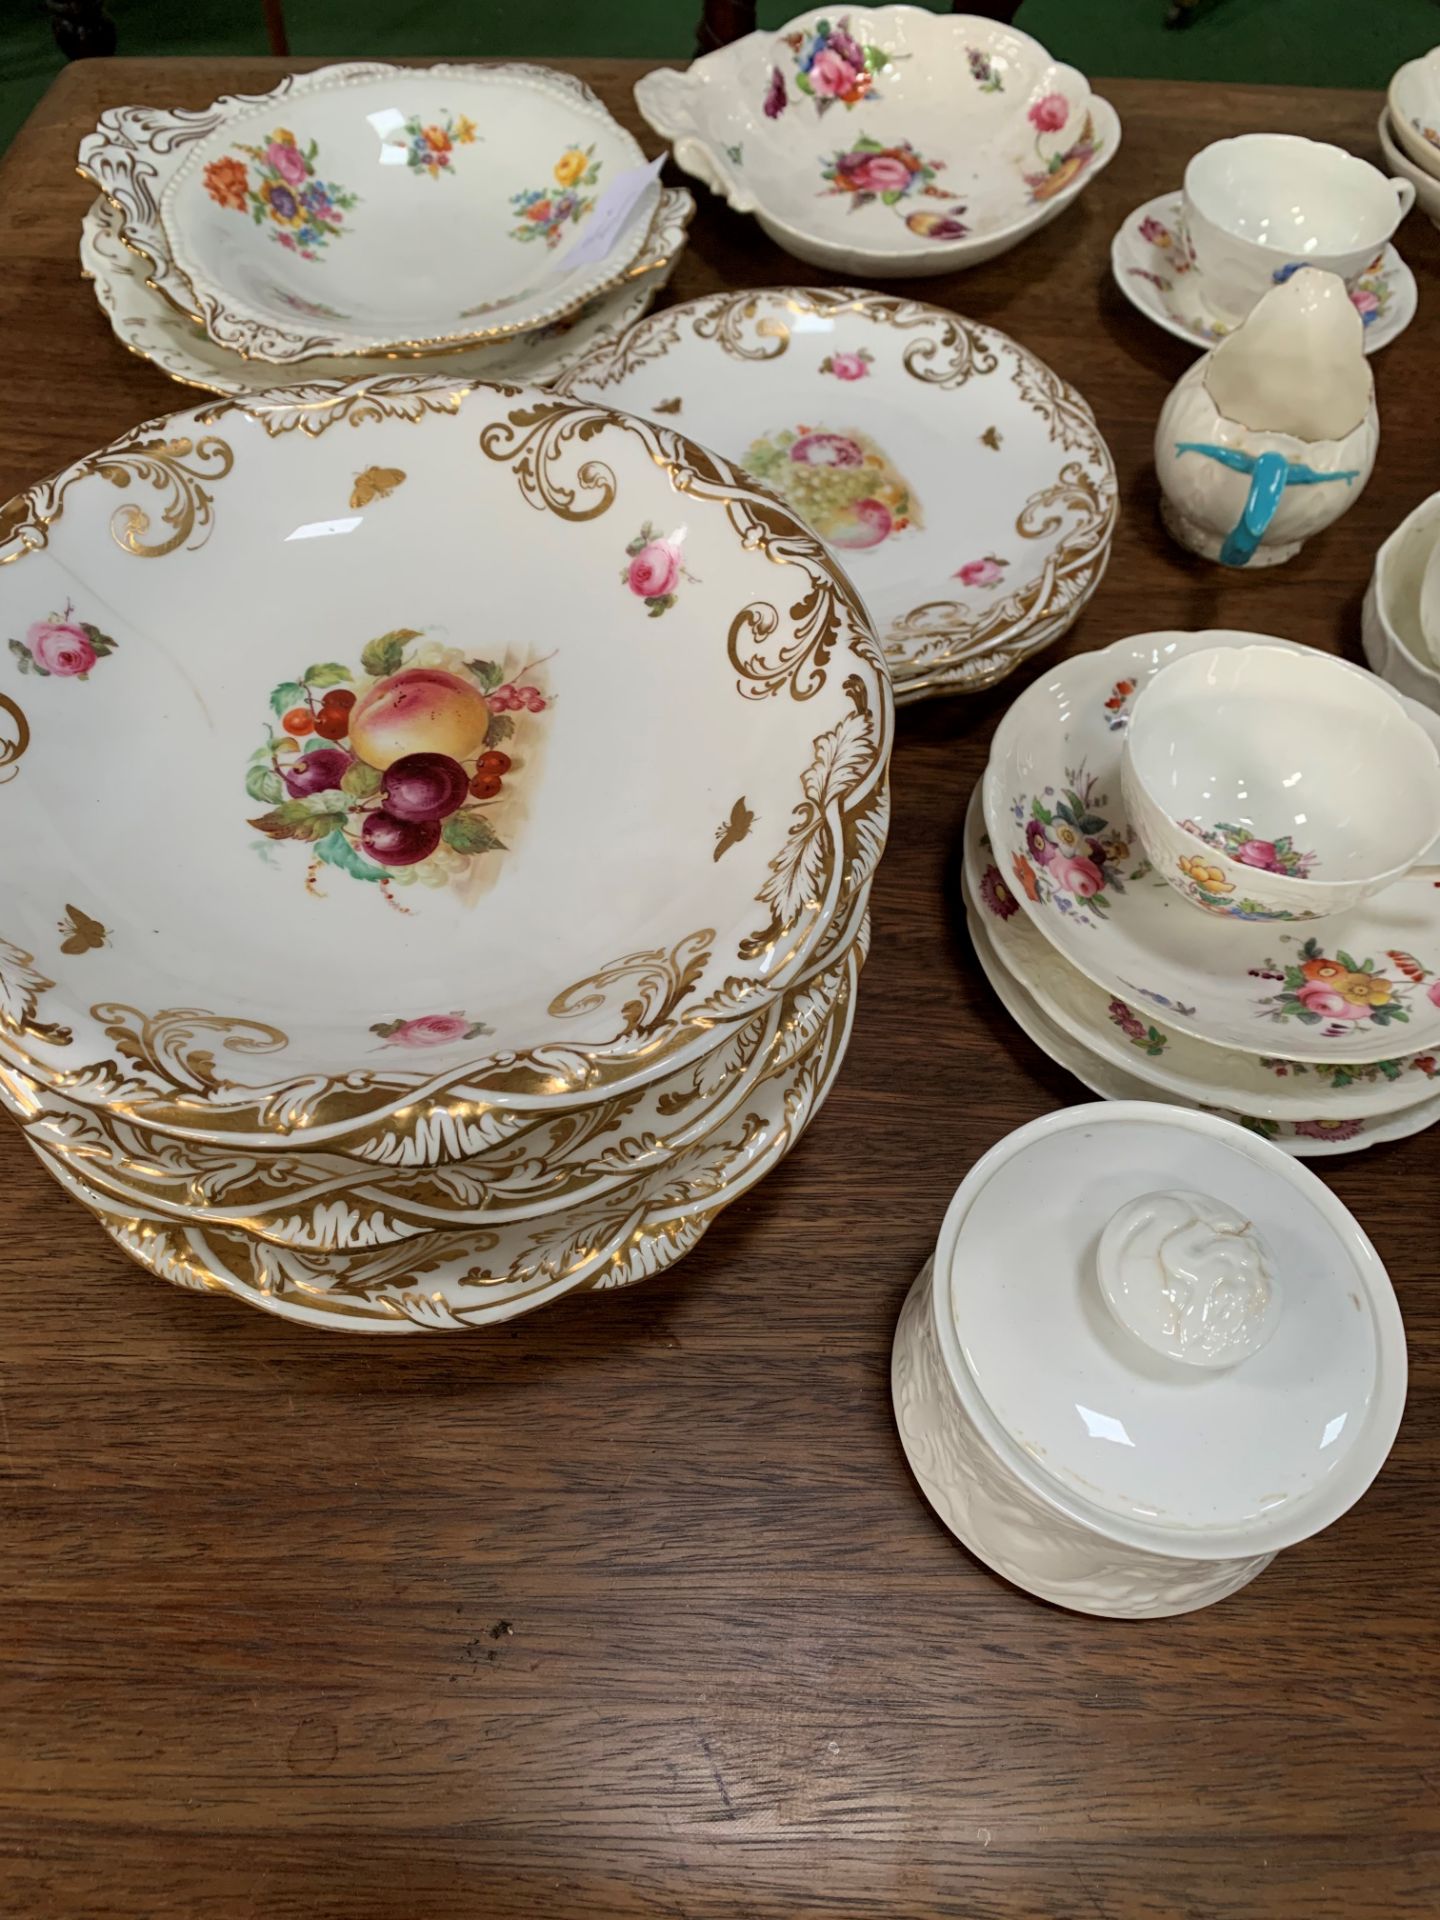 Collection of mainly Coalport china, plus Longport mid-19th century plates - Image 2 of 3